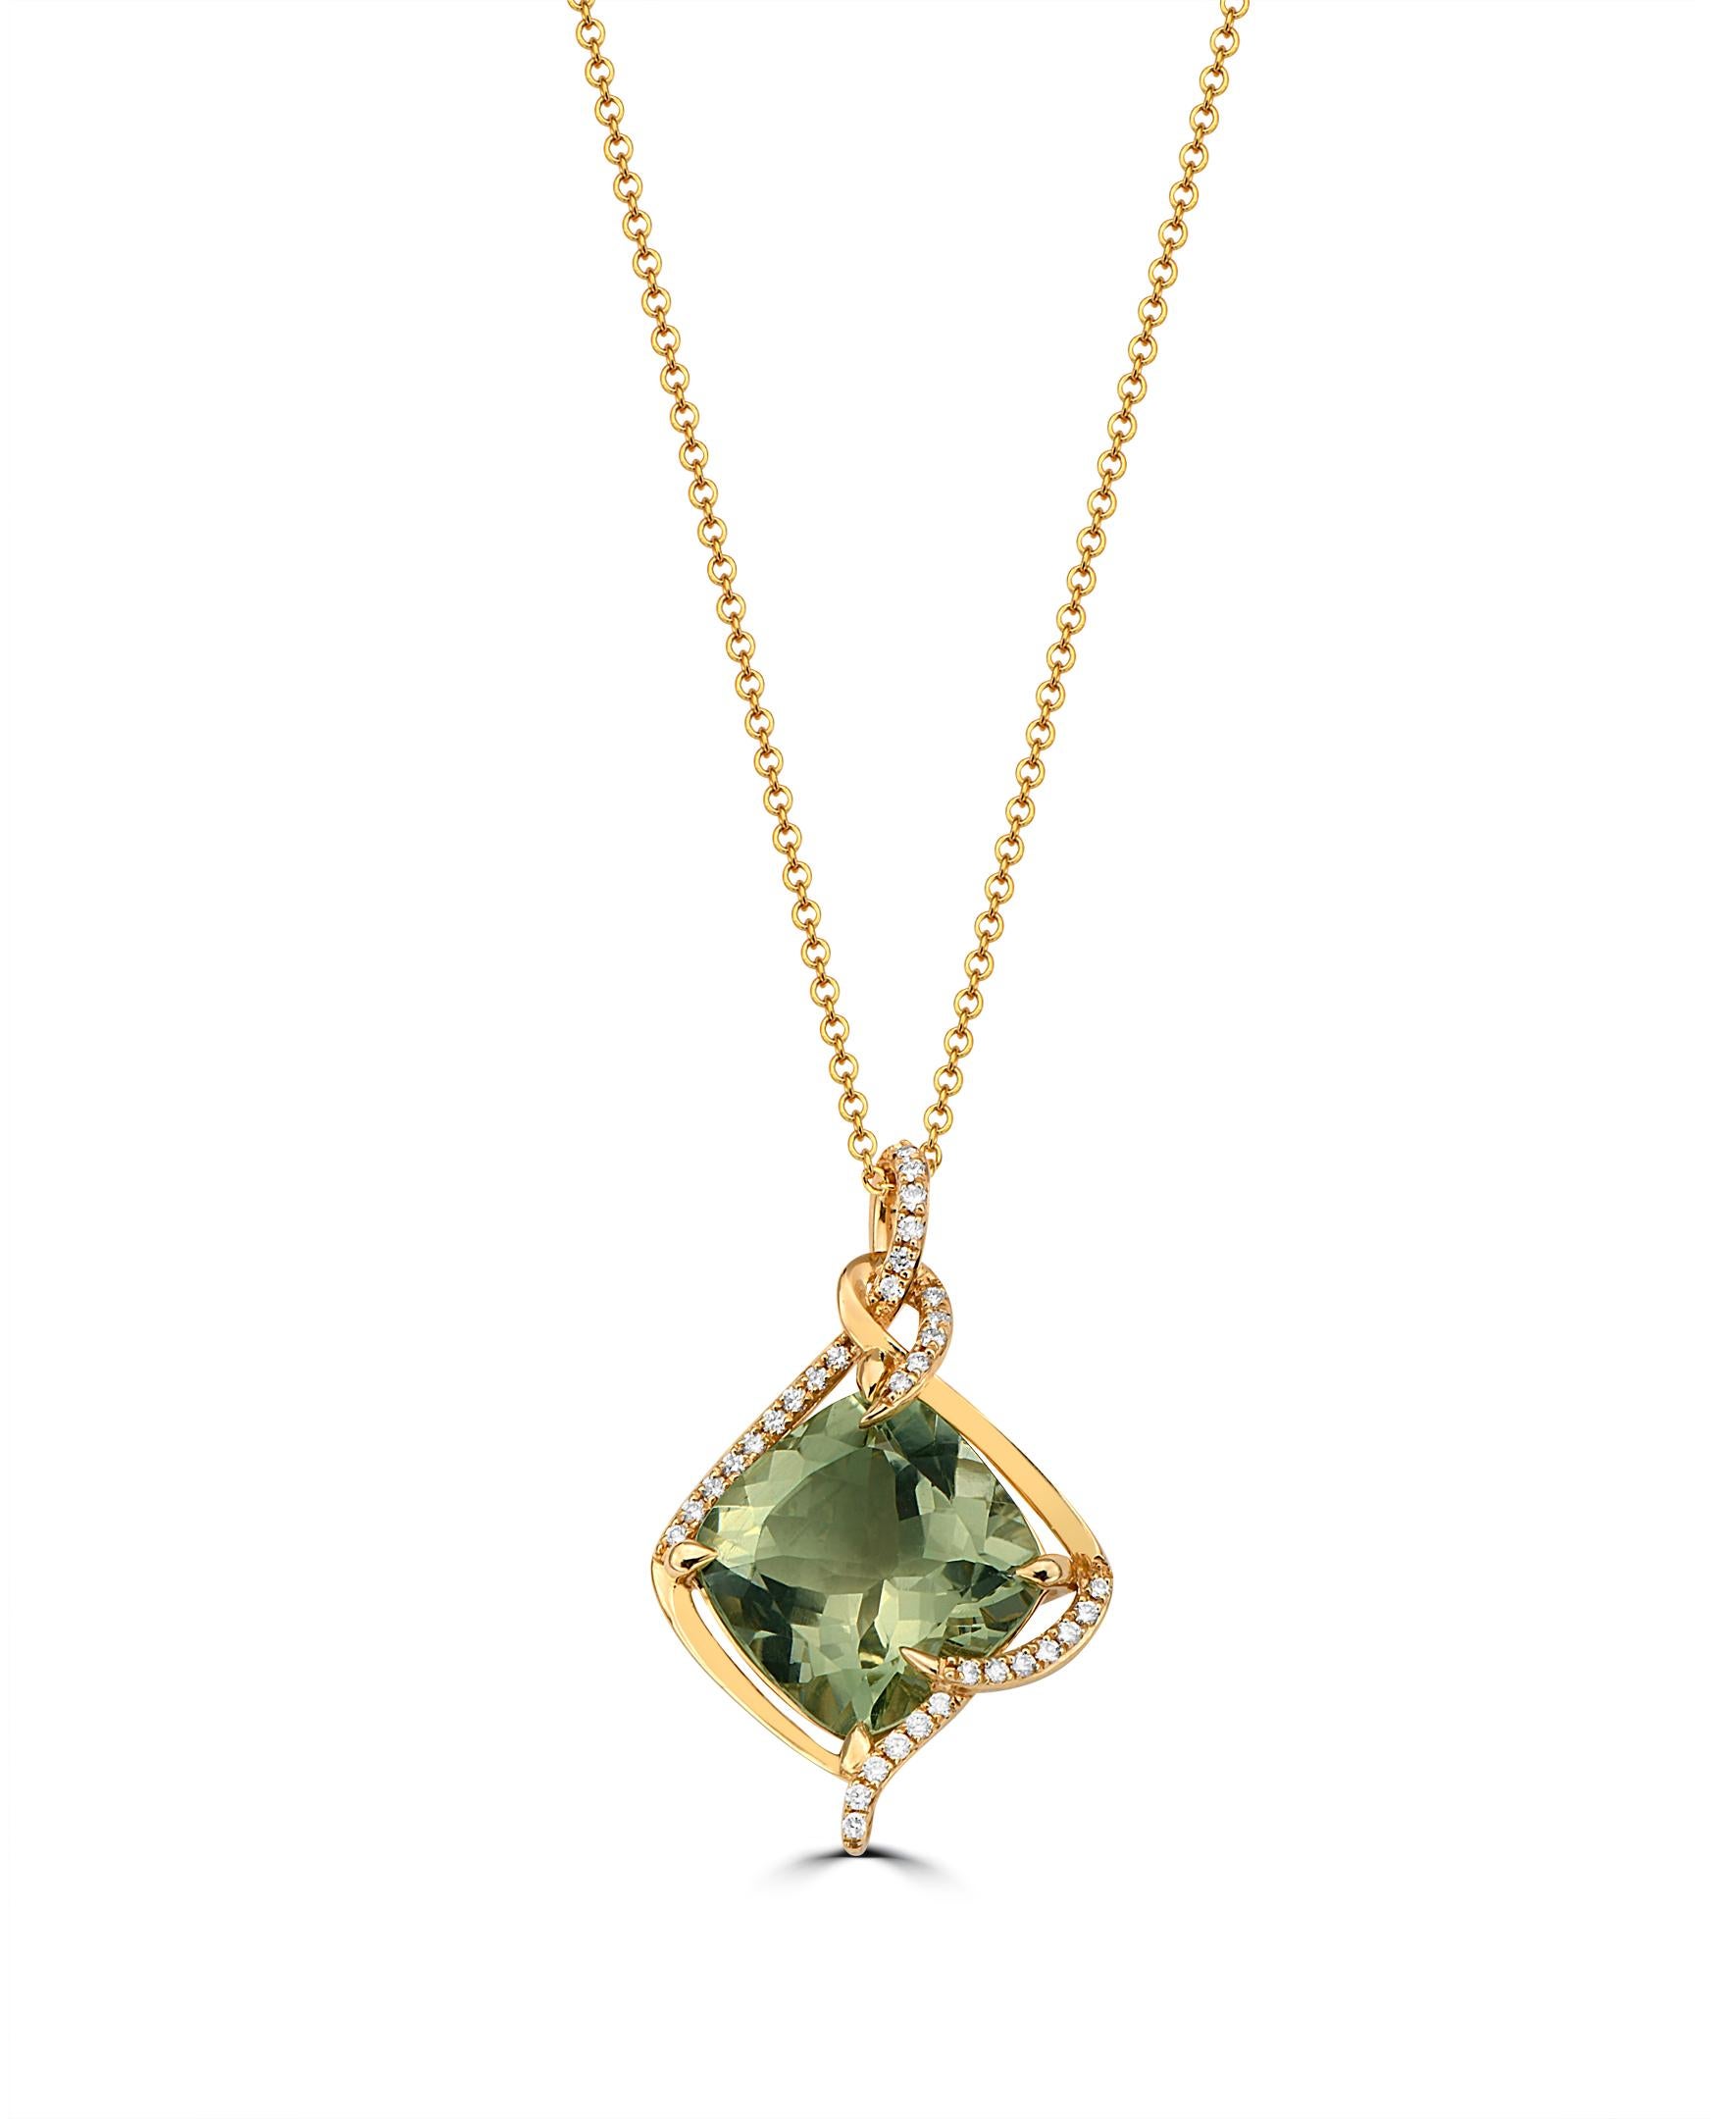 This Effy pendant is a simple and elegant design highlighting a cushion cut center Green Amethyst stone.

Total diamond weight is 0.15ct. Cushion cut green amethyst is 5.77ct.

Item number R837.

